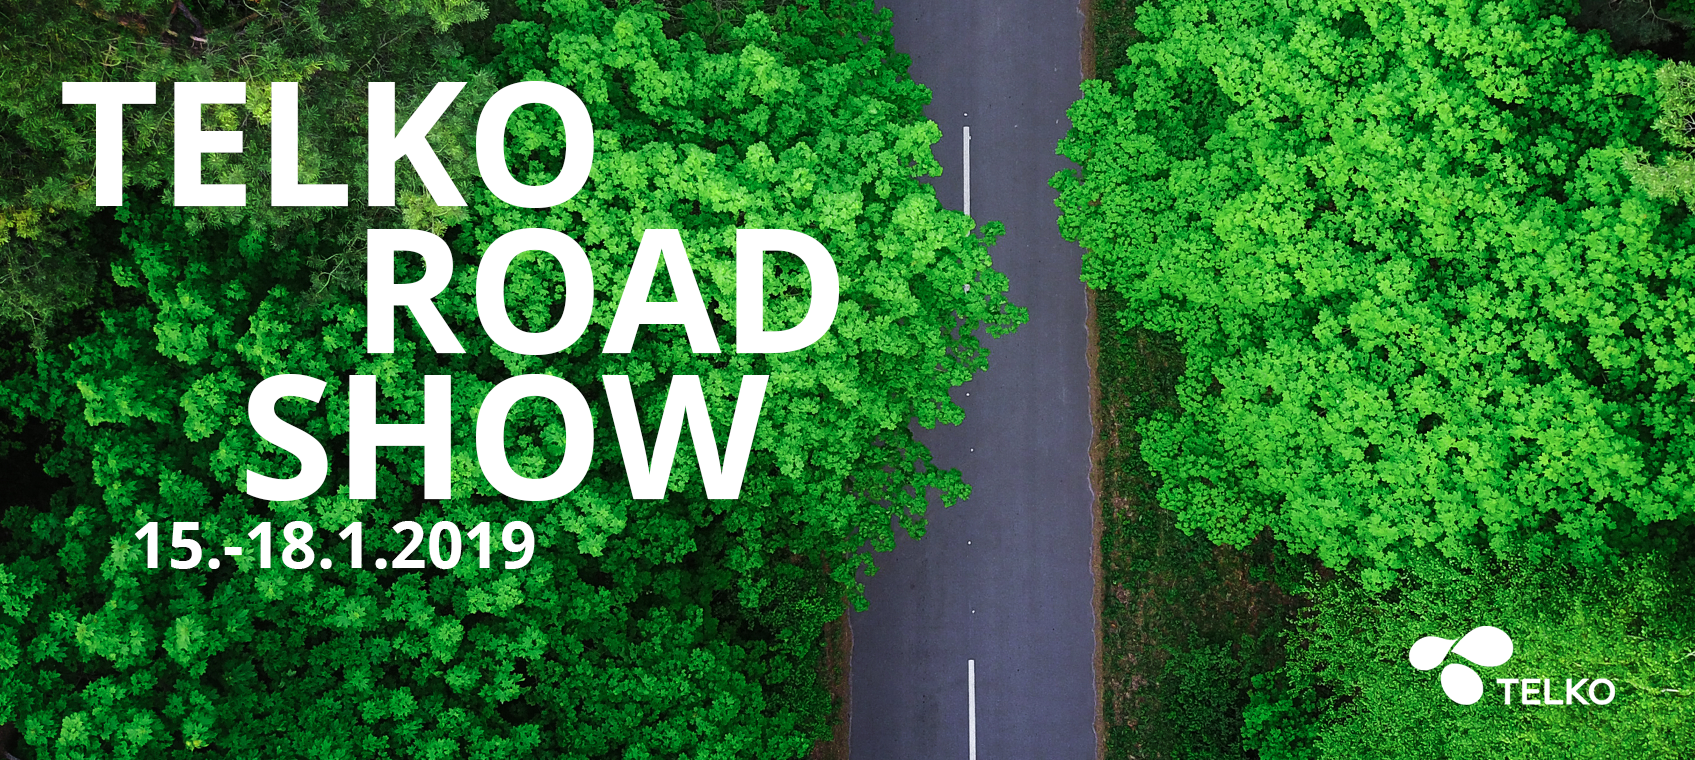 Telko_Road_show_2019_email_banner